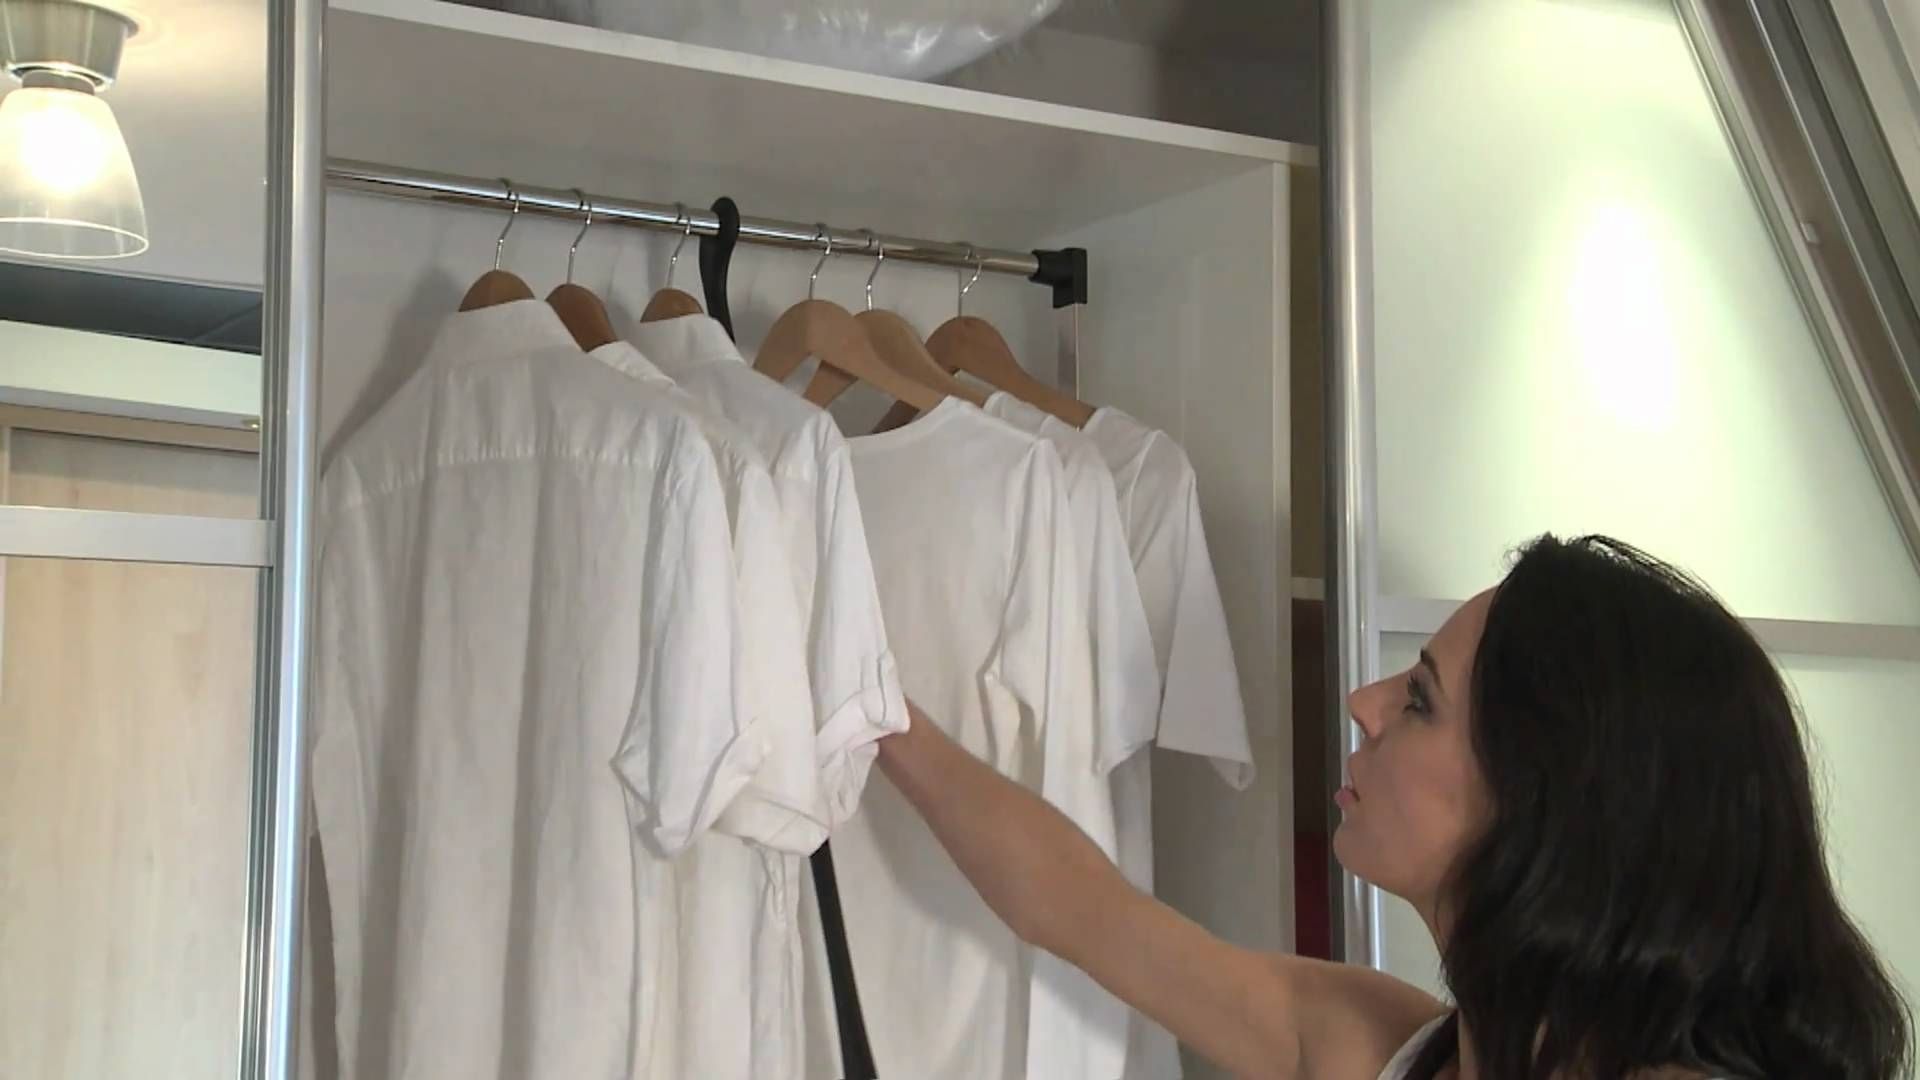 Wardrobes With Double Hanging Rail Pertaining To Latest Sliderobes Wardrobe Pull Down Rail – Youtube (View 14 of 15)